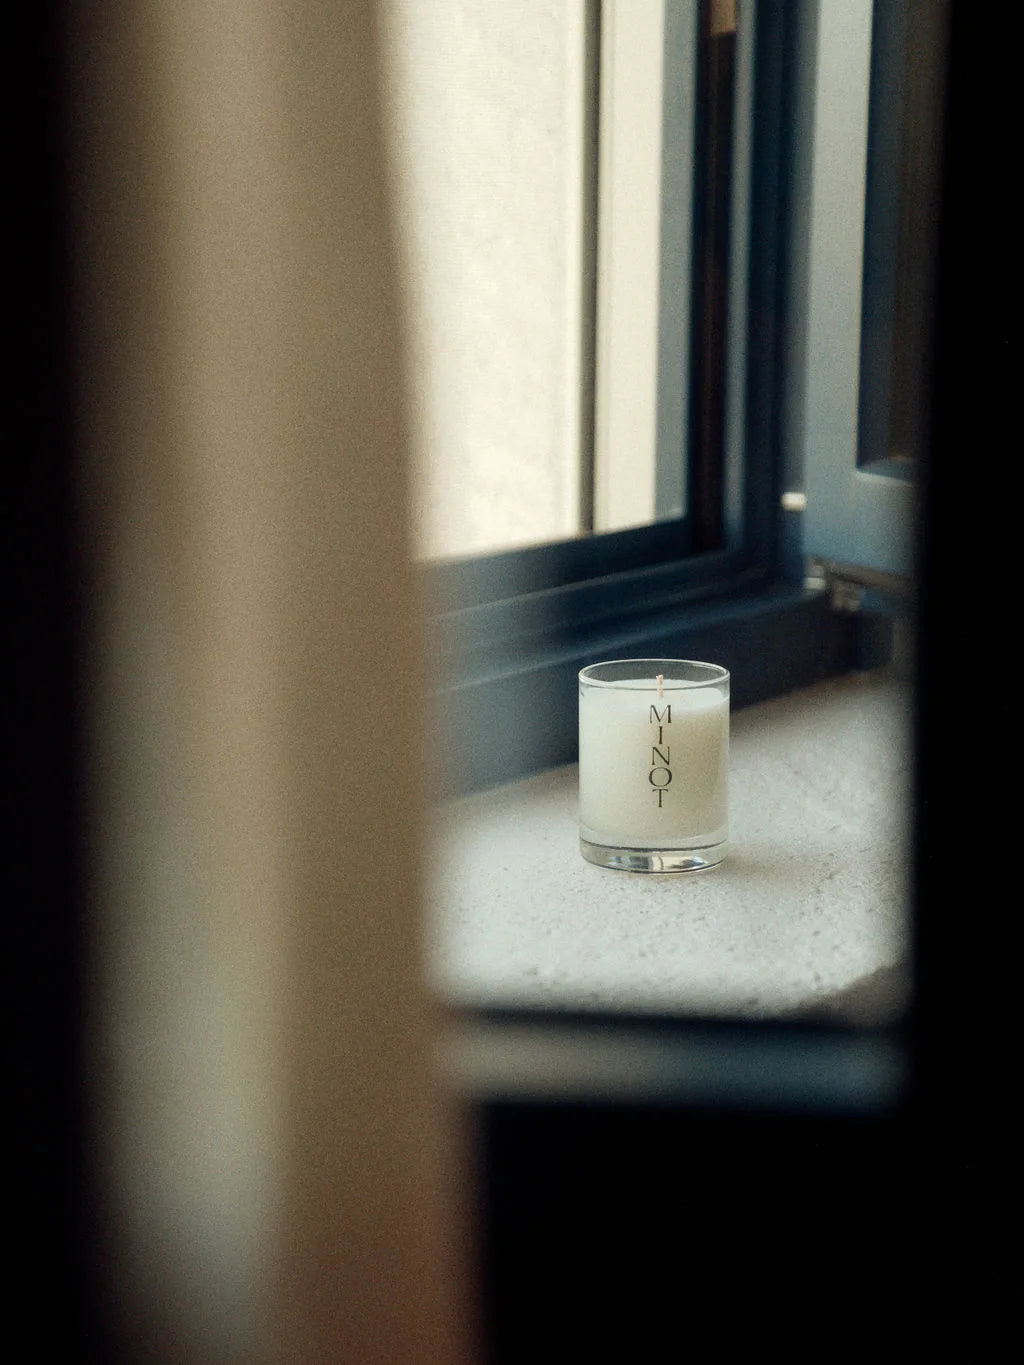 MINOT's Cliffwalk mini candle sits on a window ledge, emanating a sandalwood-patchouli scent blend